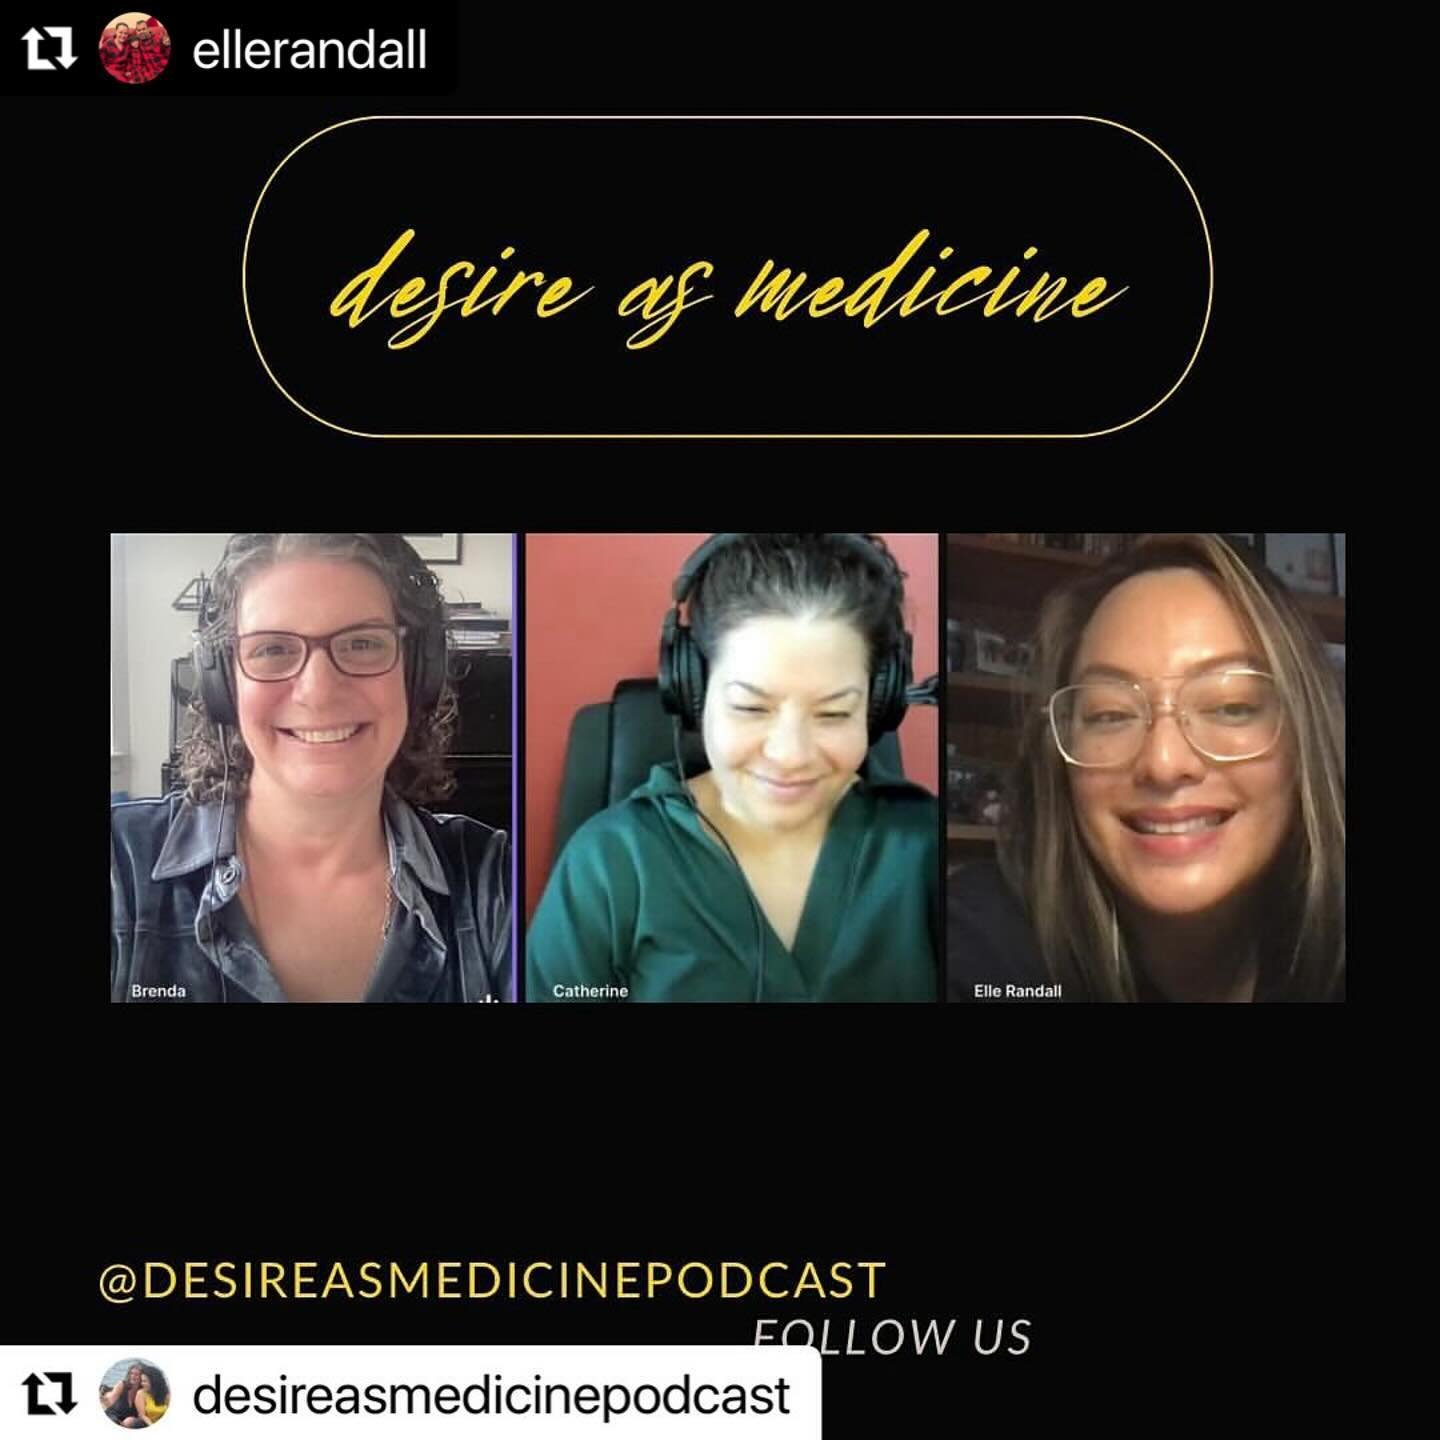 Just want to say a big THANK YOU to @desireasmedicinepodcast for having me on as their guest! It&rsquo;s been one week since this episode&rsquo;s release, and I&rsquo;m still giddy about it! My first podcast 😁😁😁

Thank you @brenda_fredericks and @